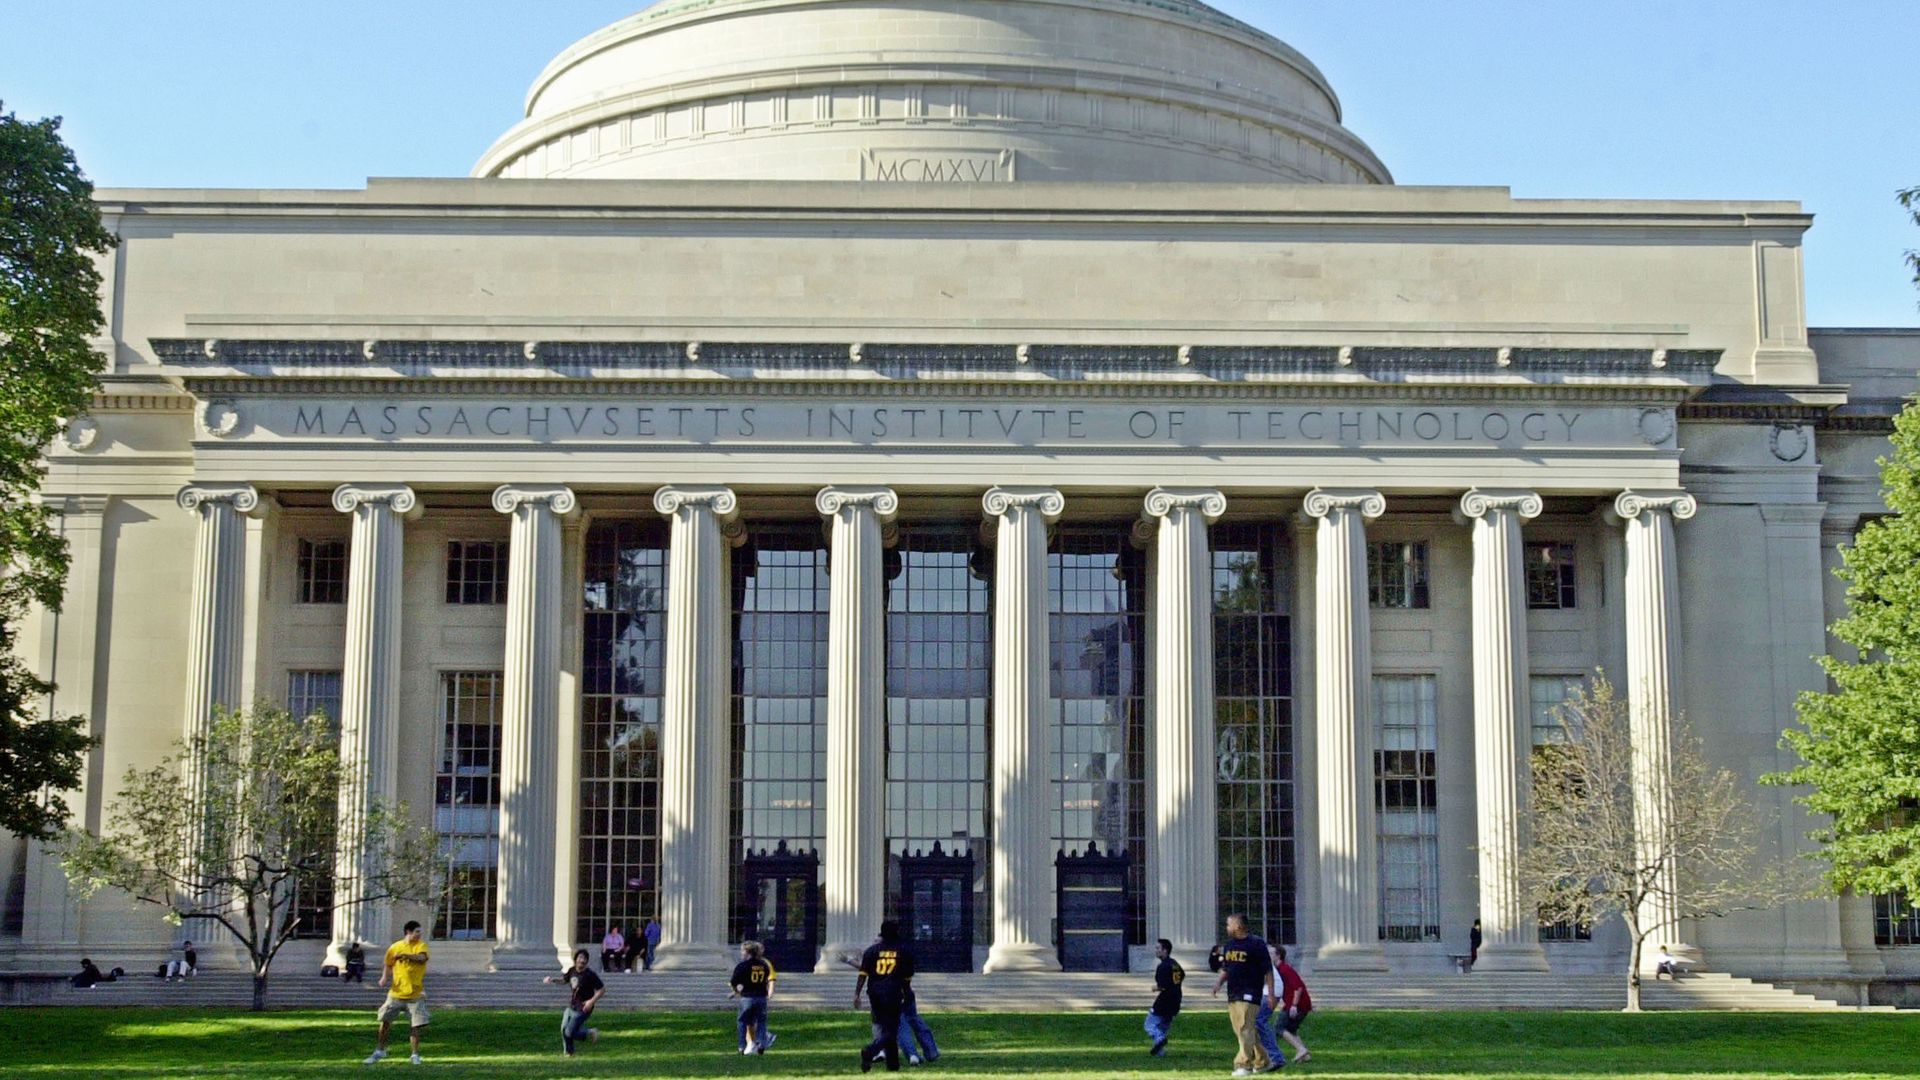 A building at MIT with columns and a dome